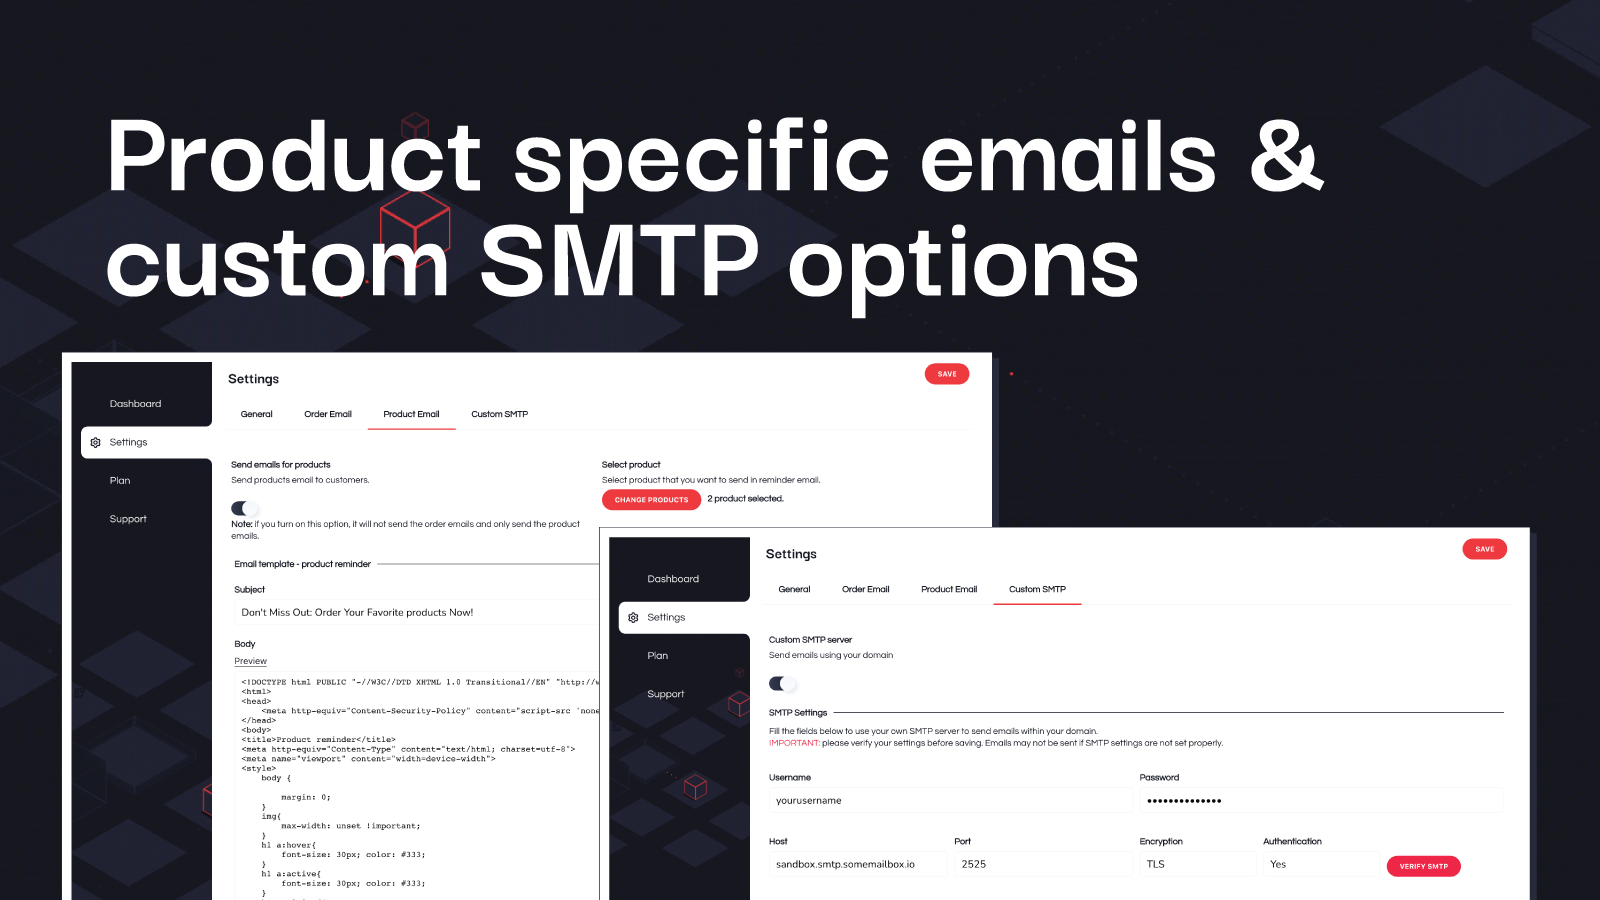 Product specific emails and custom SMTP options